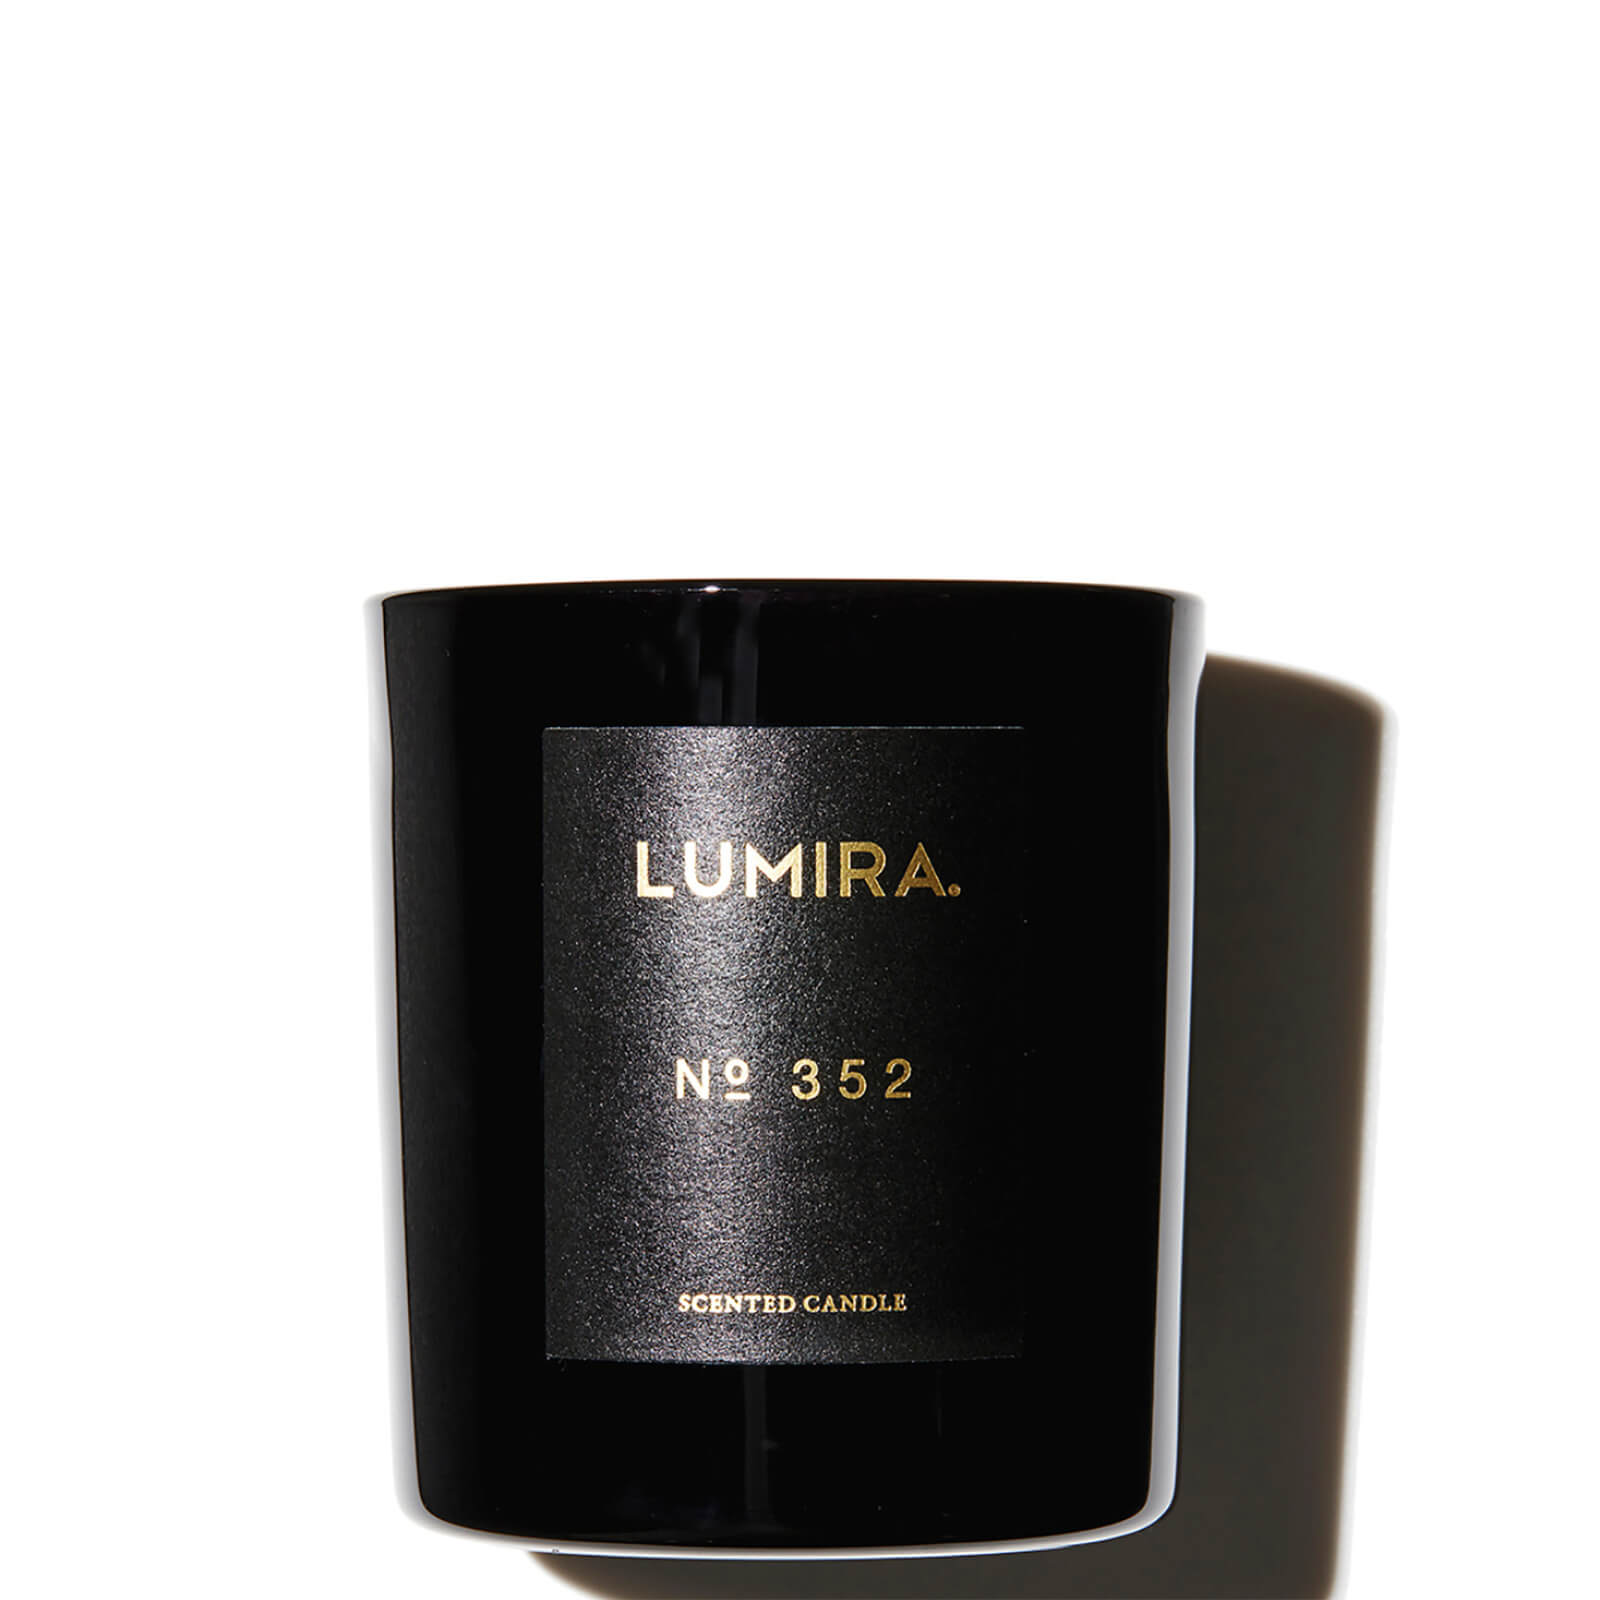 Lumira No.352 Leather And Cedar Black Candle 300g